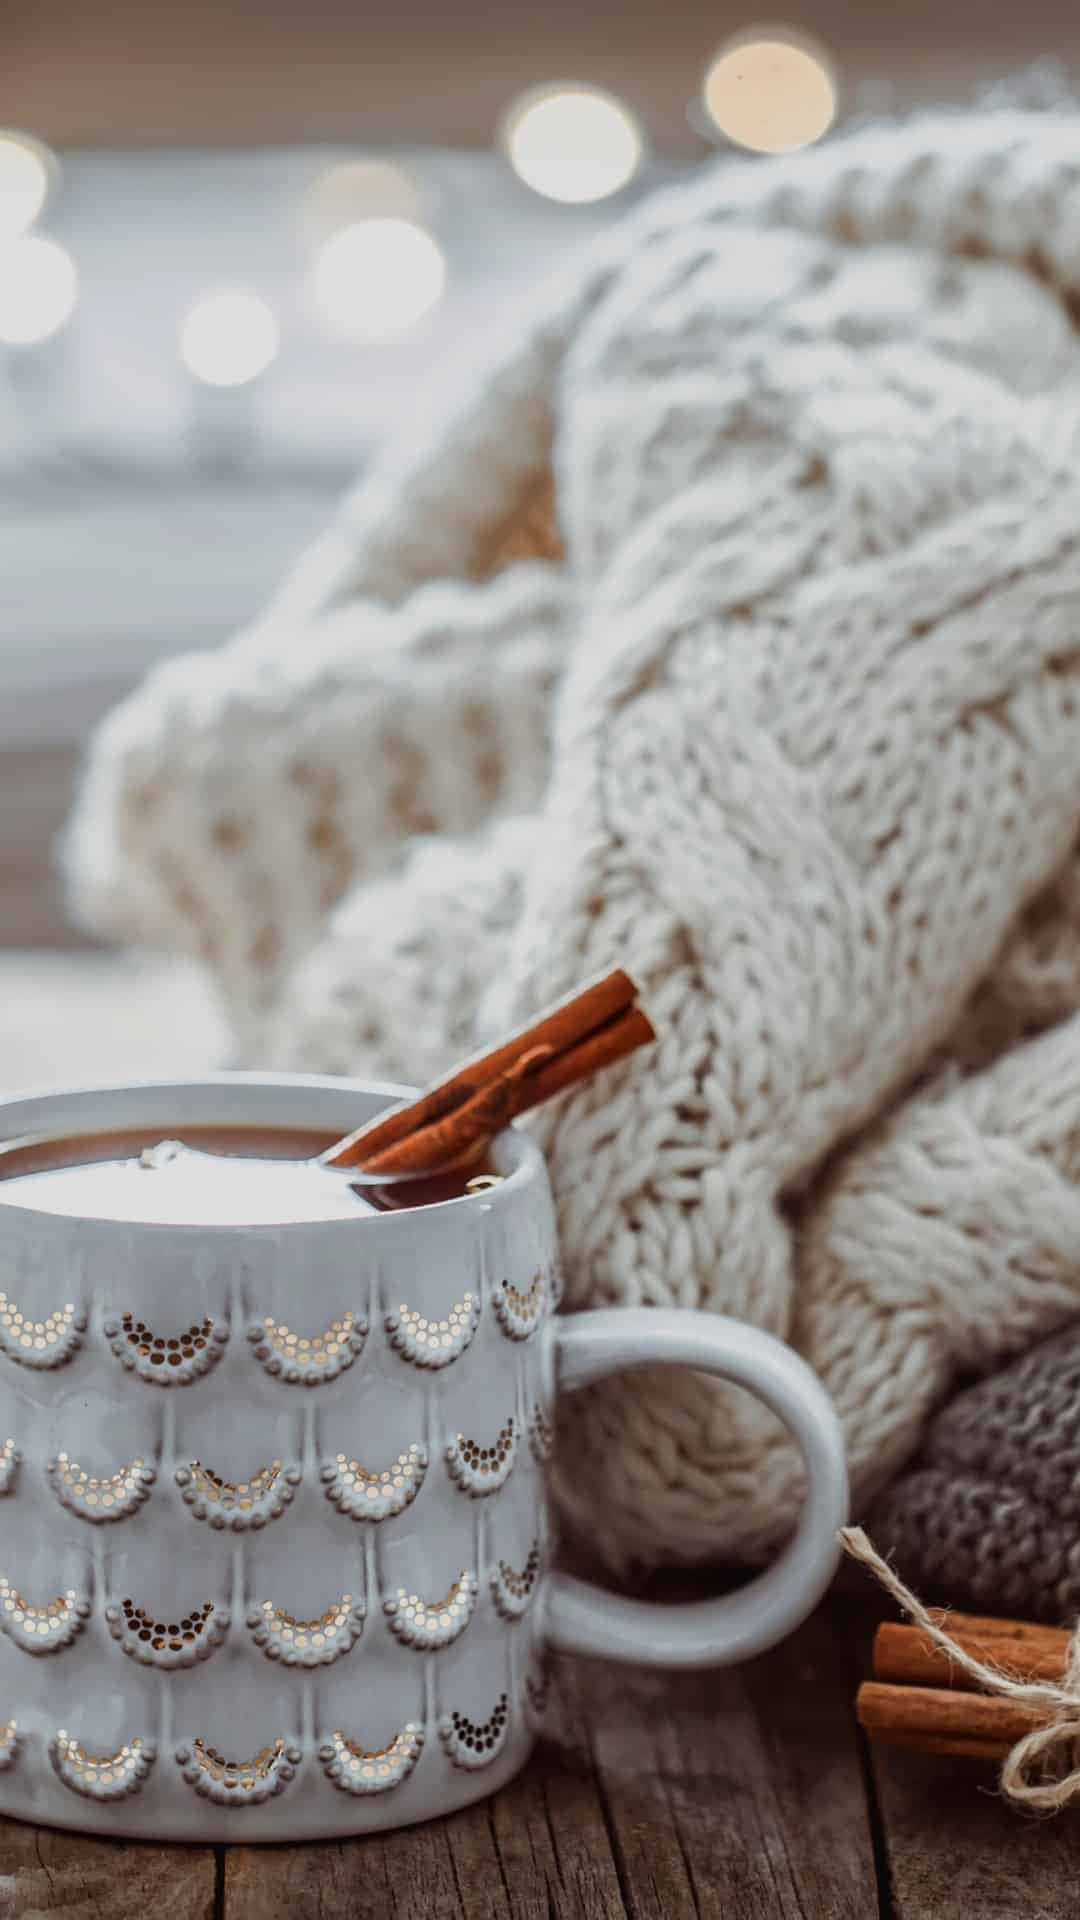 A Cup Of Hot Chocolate With Cinnamon Sticks And A Knitted Sweater Wallpaper